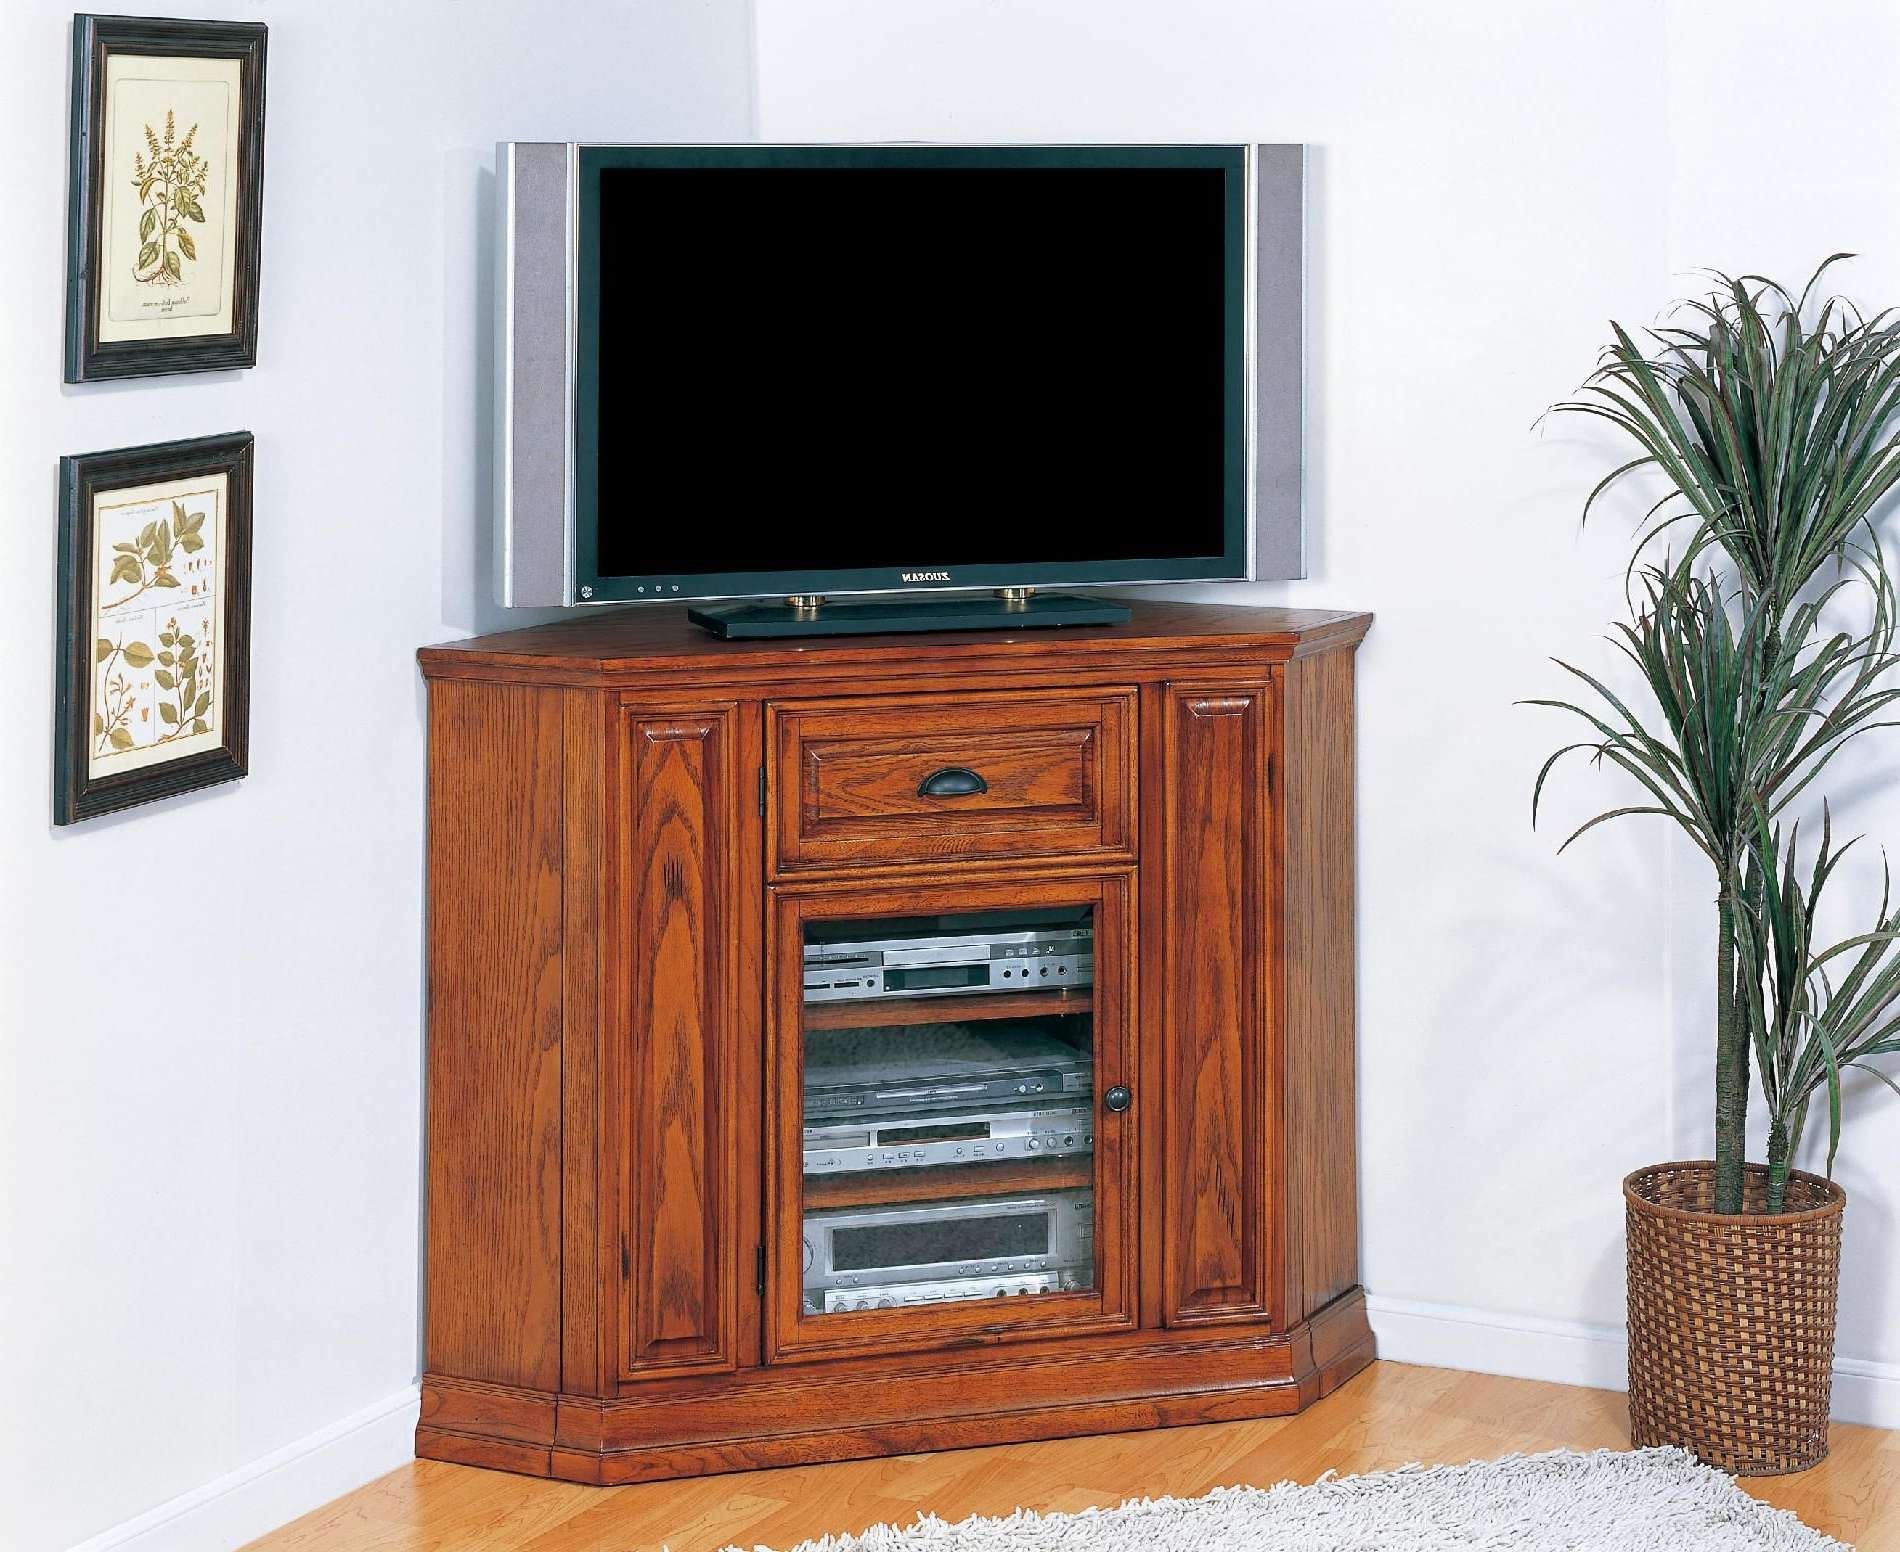 Furniture. Clasic Black Lacquer Mahogany Wood Corner Tv Stand With Pertaining To Mahogany Corner Tv Cabinets (Gallery 15 of 20)